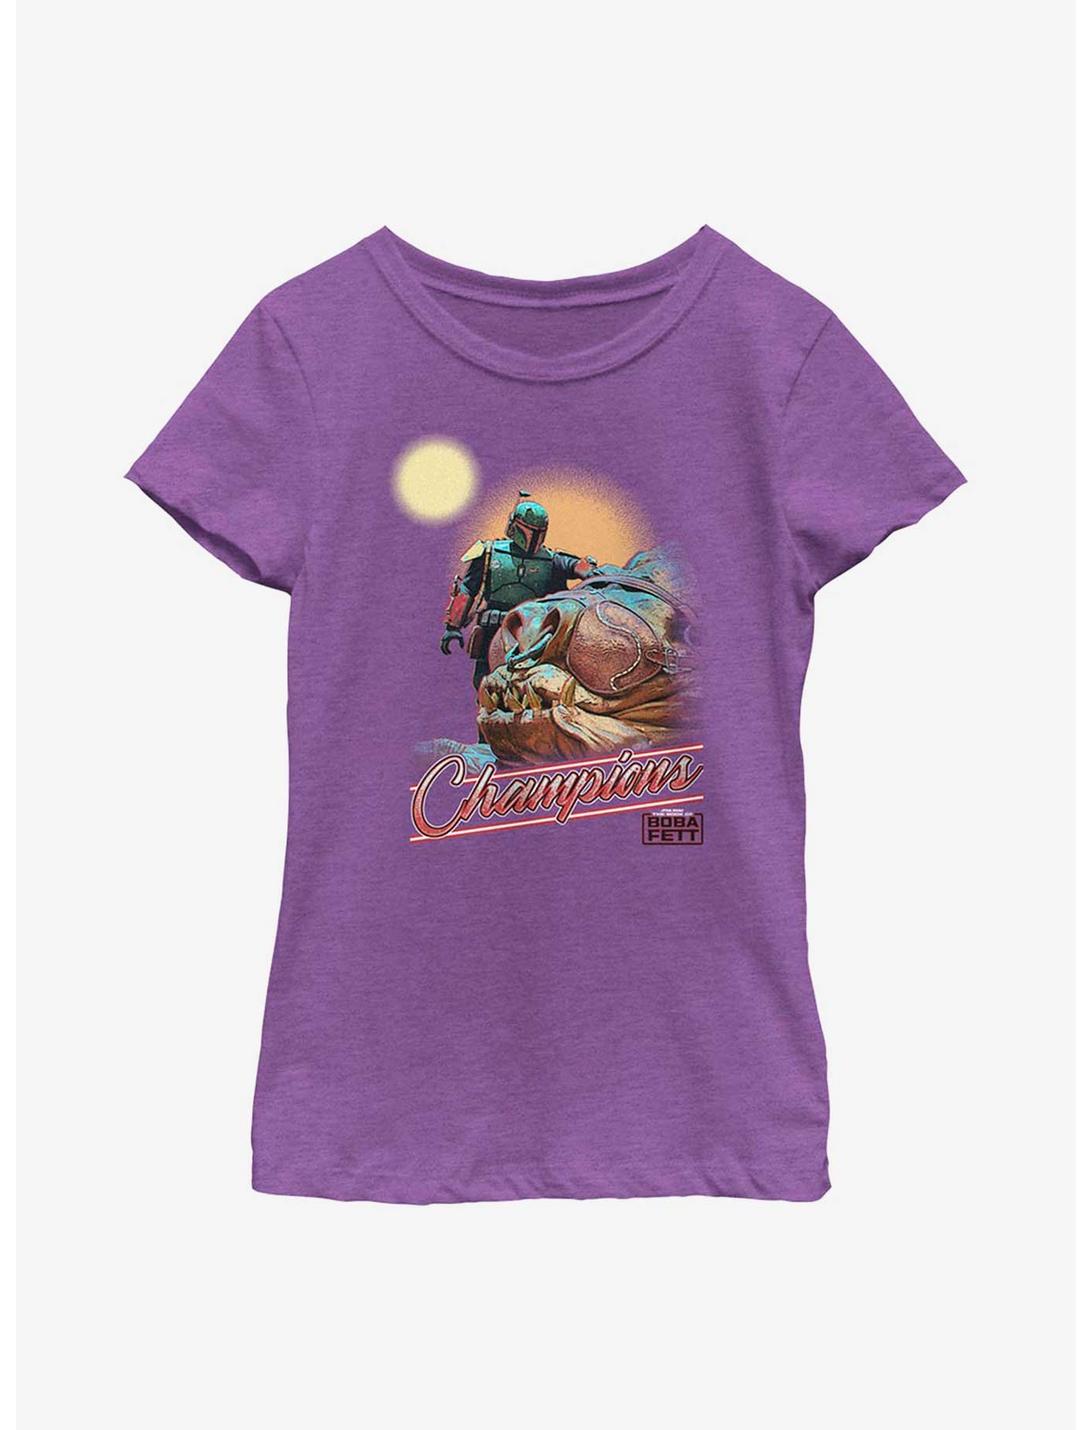 Star Wars The Book Of Boba Fett Championship Breed Youth Girls T-Shirt, PURPLE BERRY, hi-res